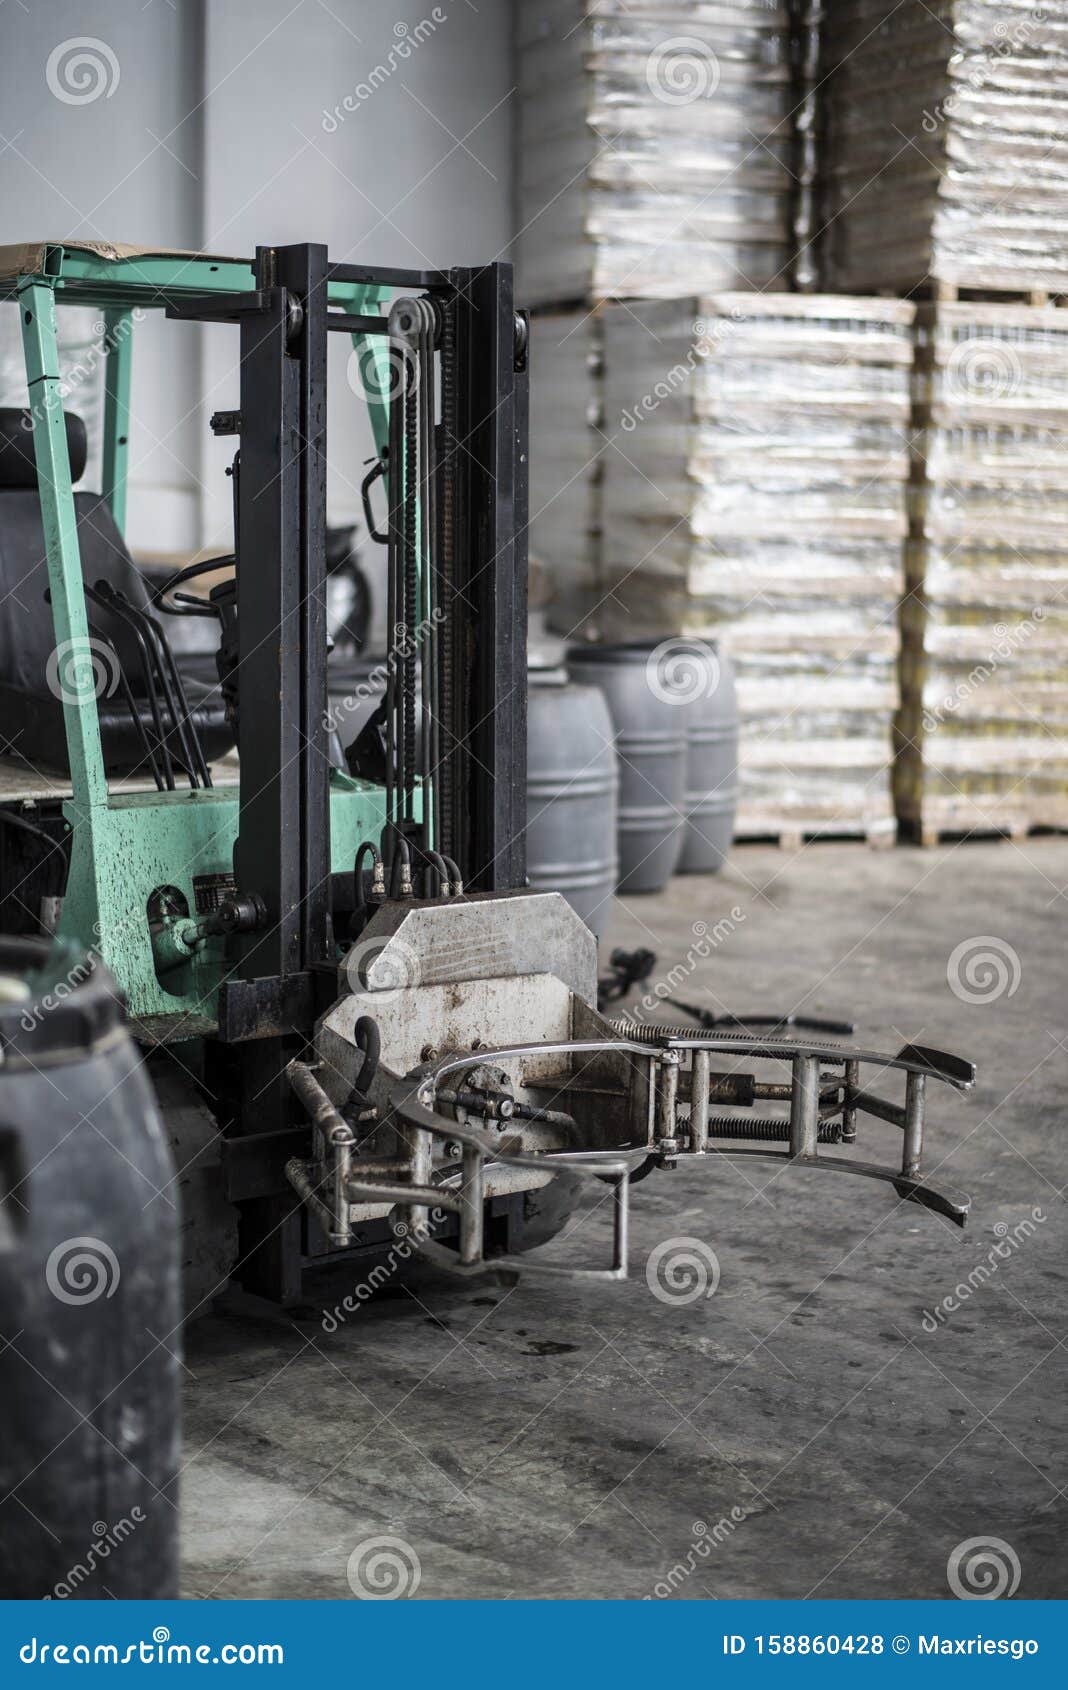 155 Forklift Parking Photos Free Royalty Free Stock Photos From Dreamstime